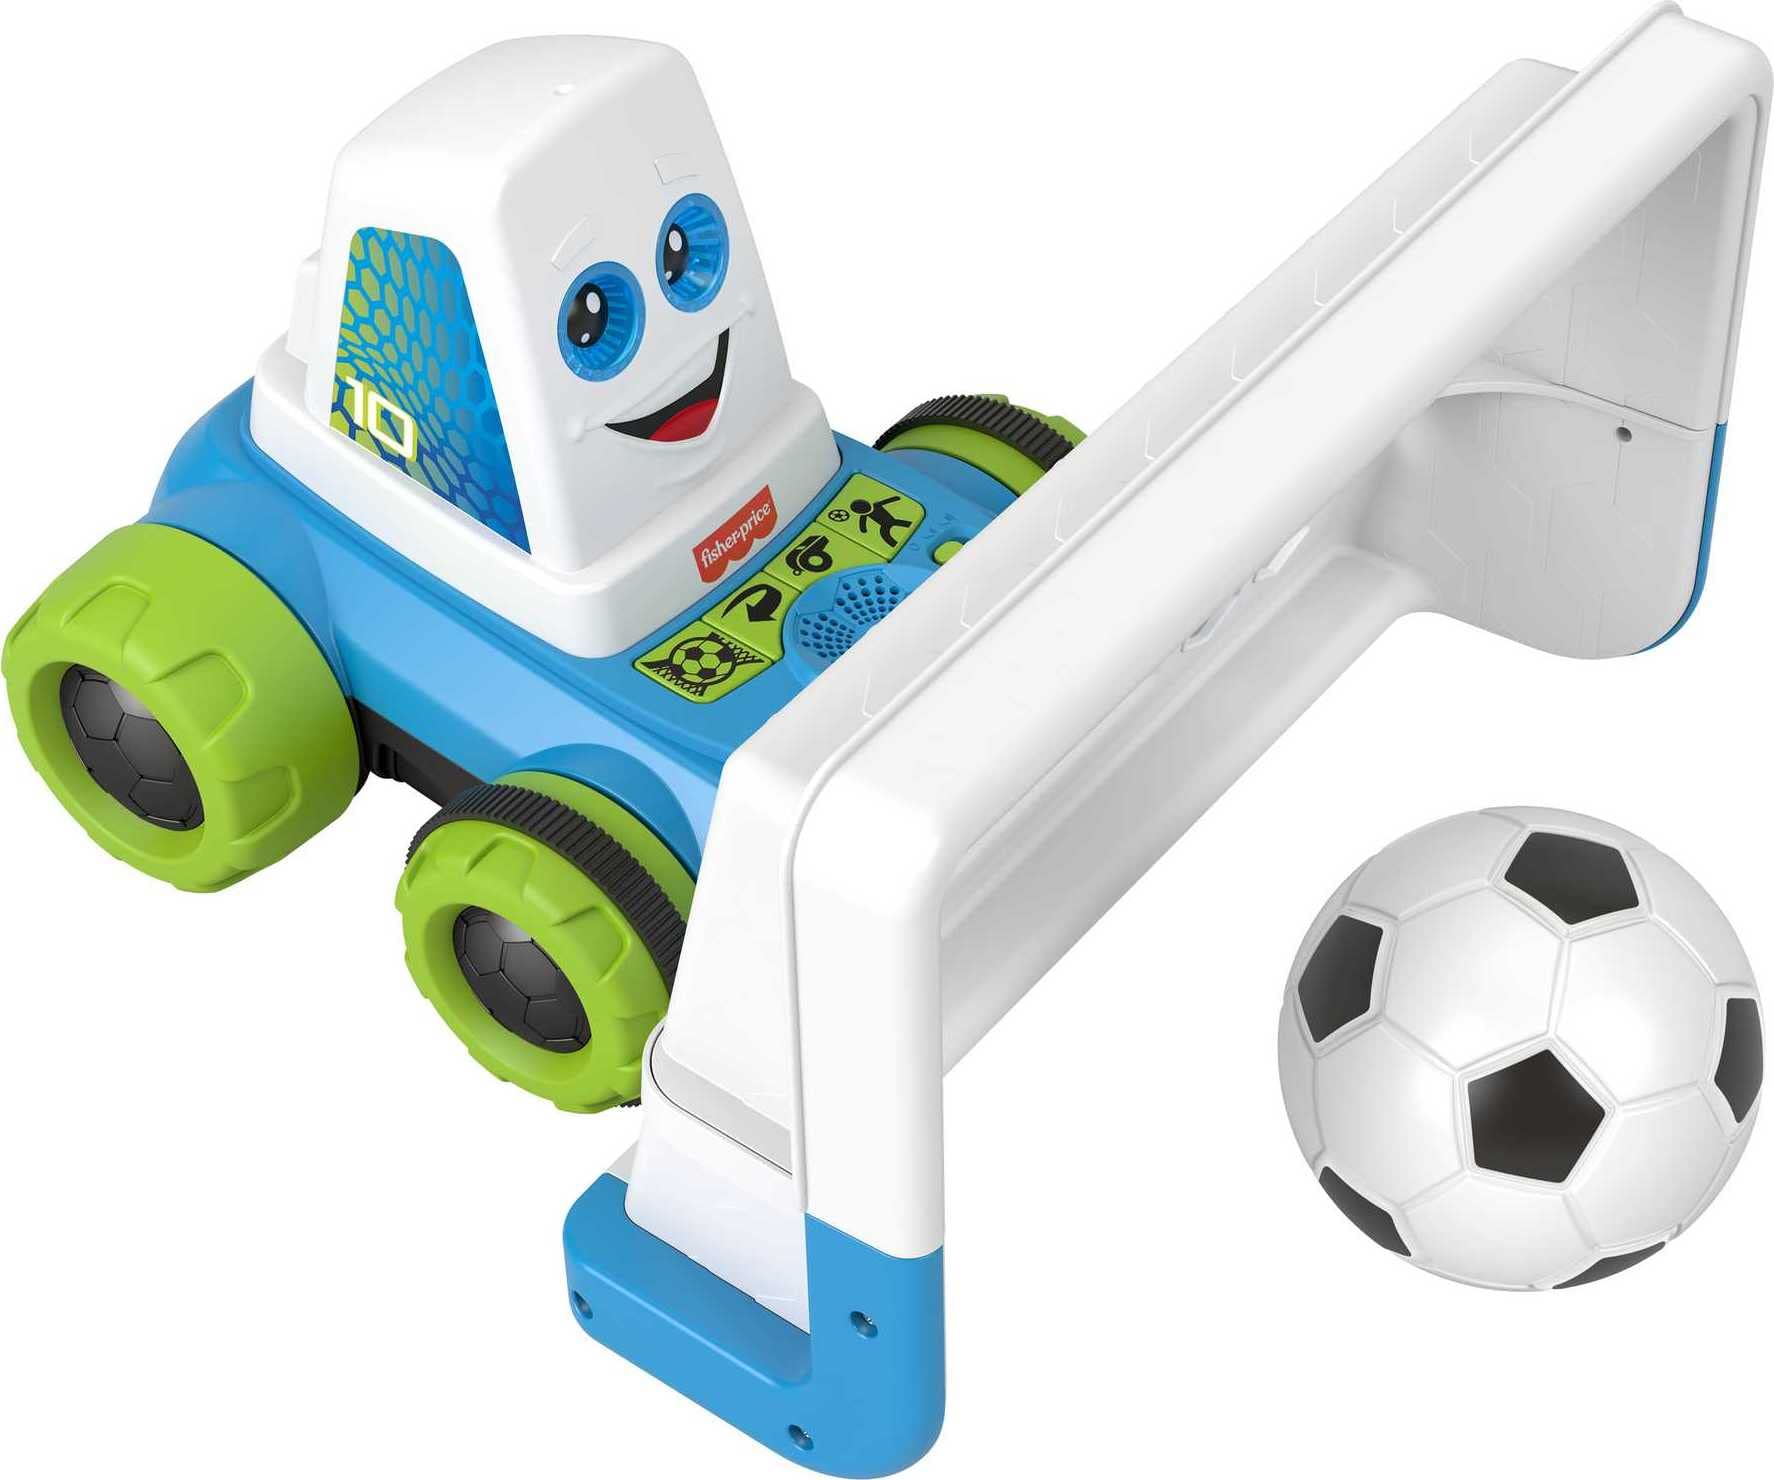 Fisher-Price Goaldozer Motorized Electronic Soccer Game Net w/ Lights & Sounds $26 or Less + Free Shipping w/ Prime or on orders $35+